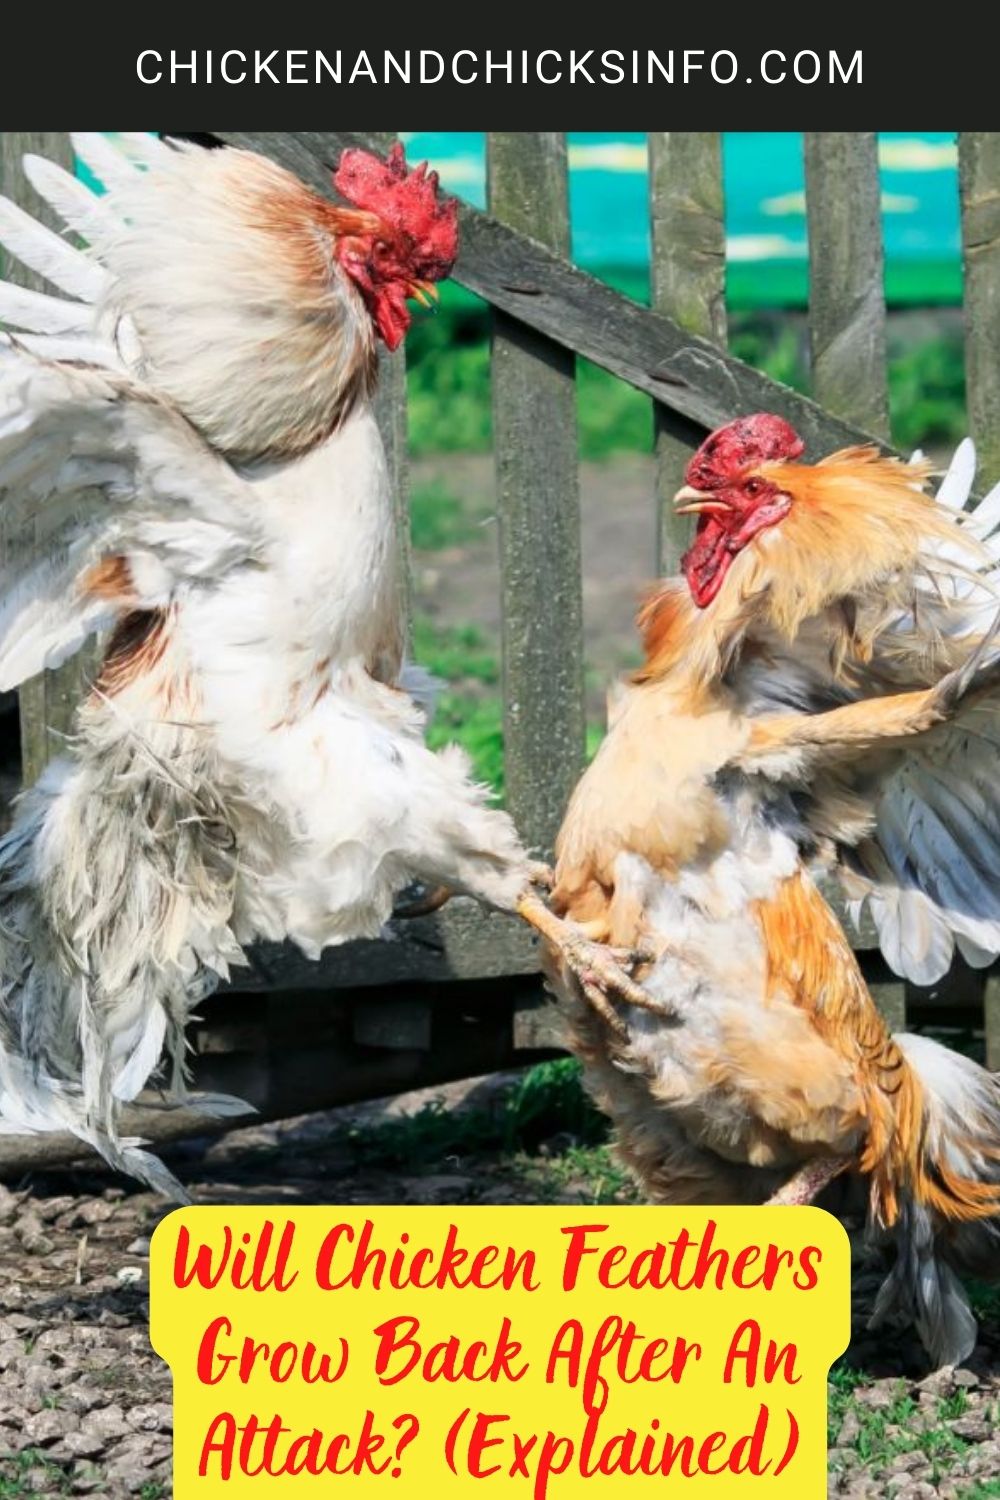 Will Chicken Feathers Grow Back After An Attack? (Explained) poster.
